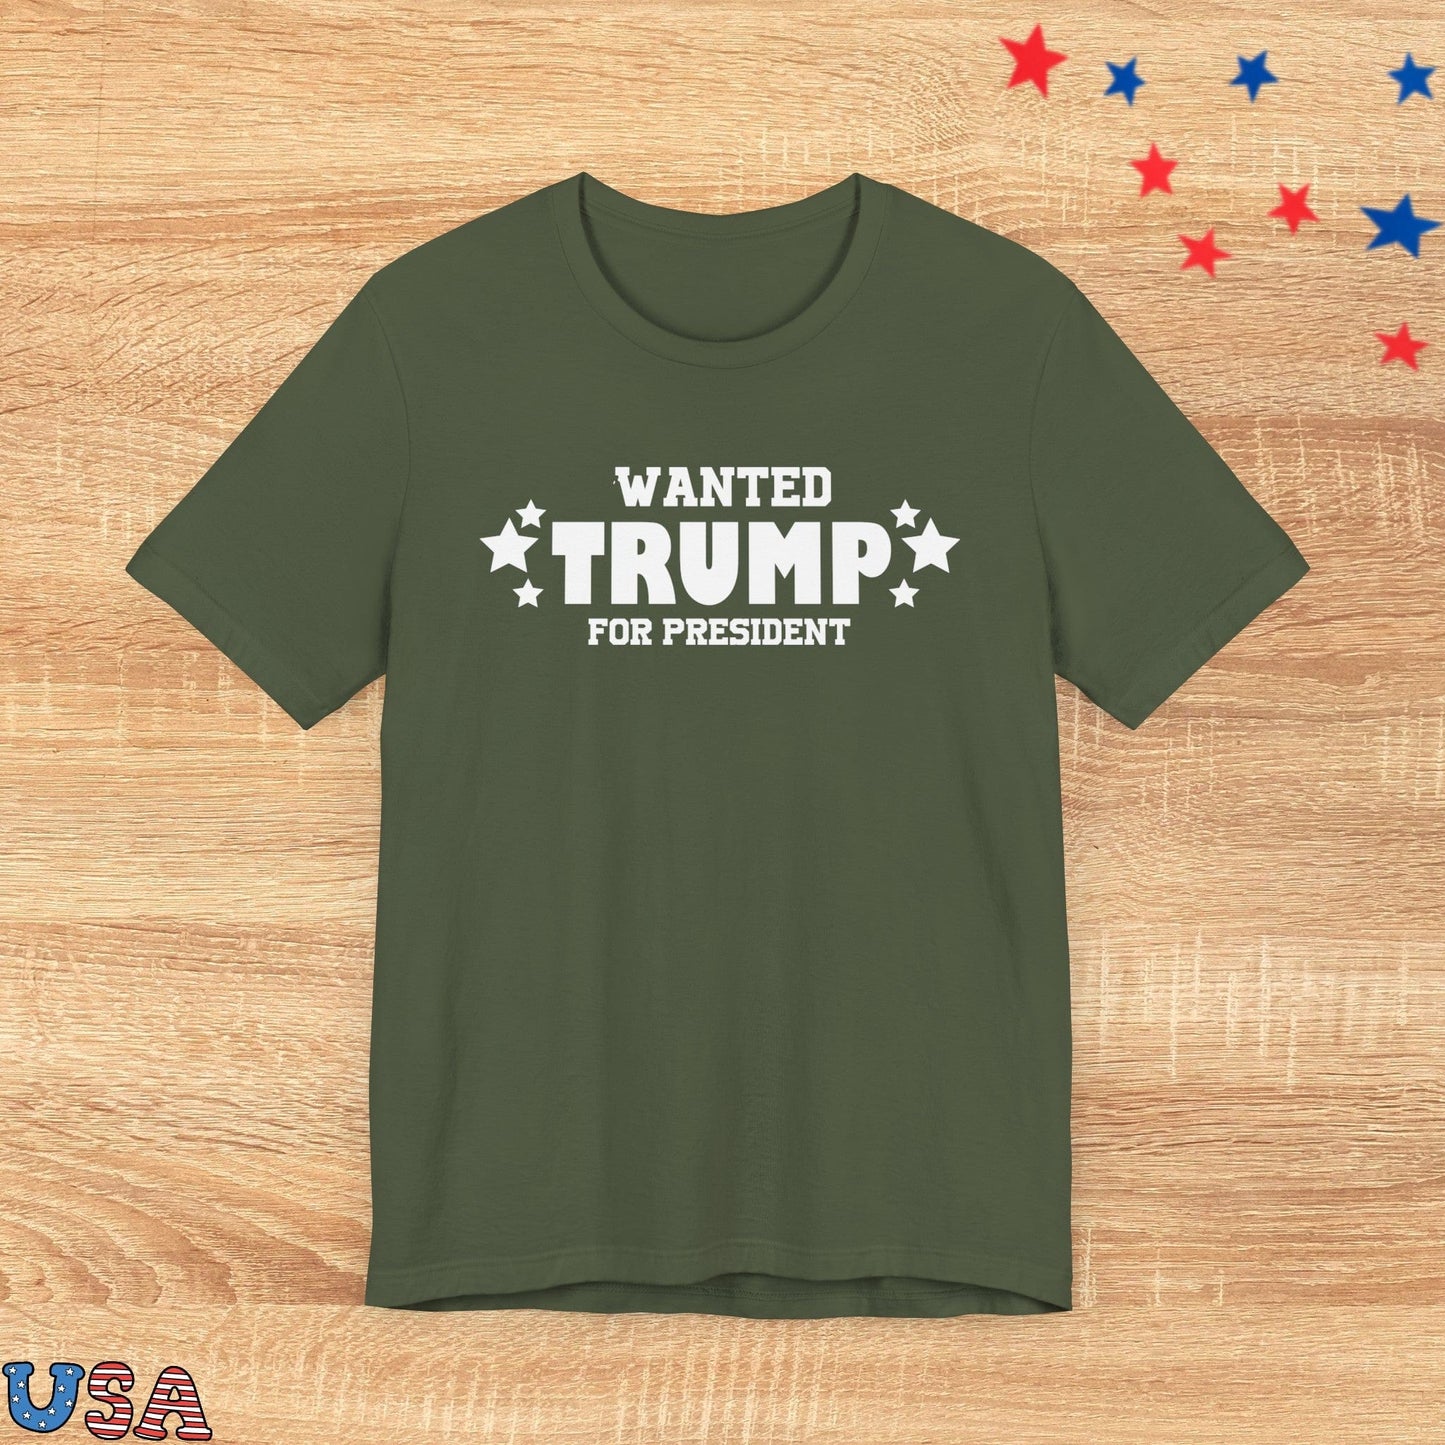 patriotic stars T-Shirt Military Green / XS Wanted Trump For President